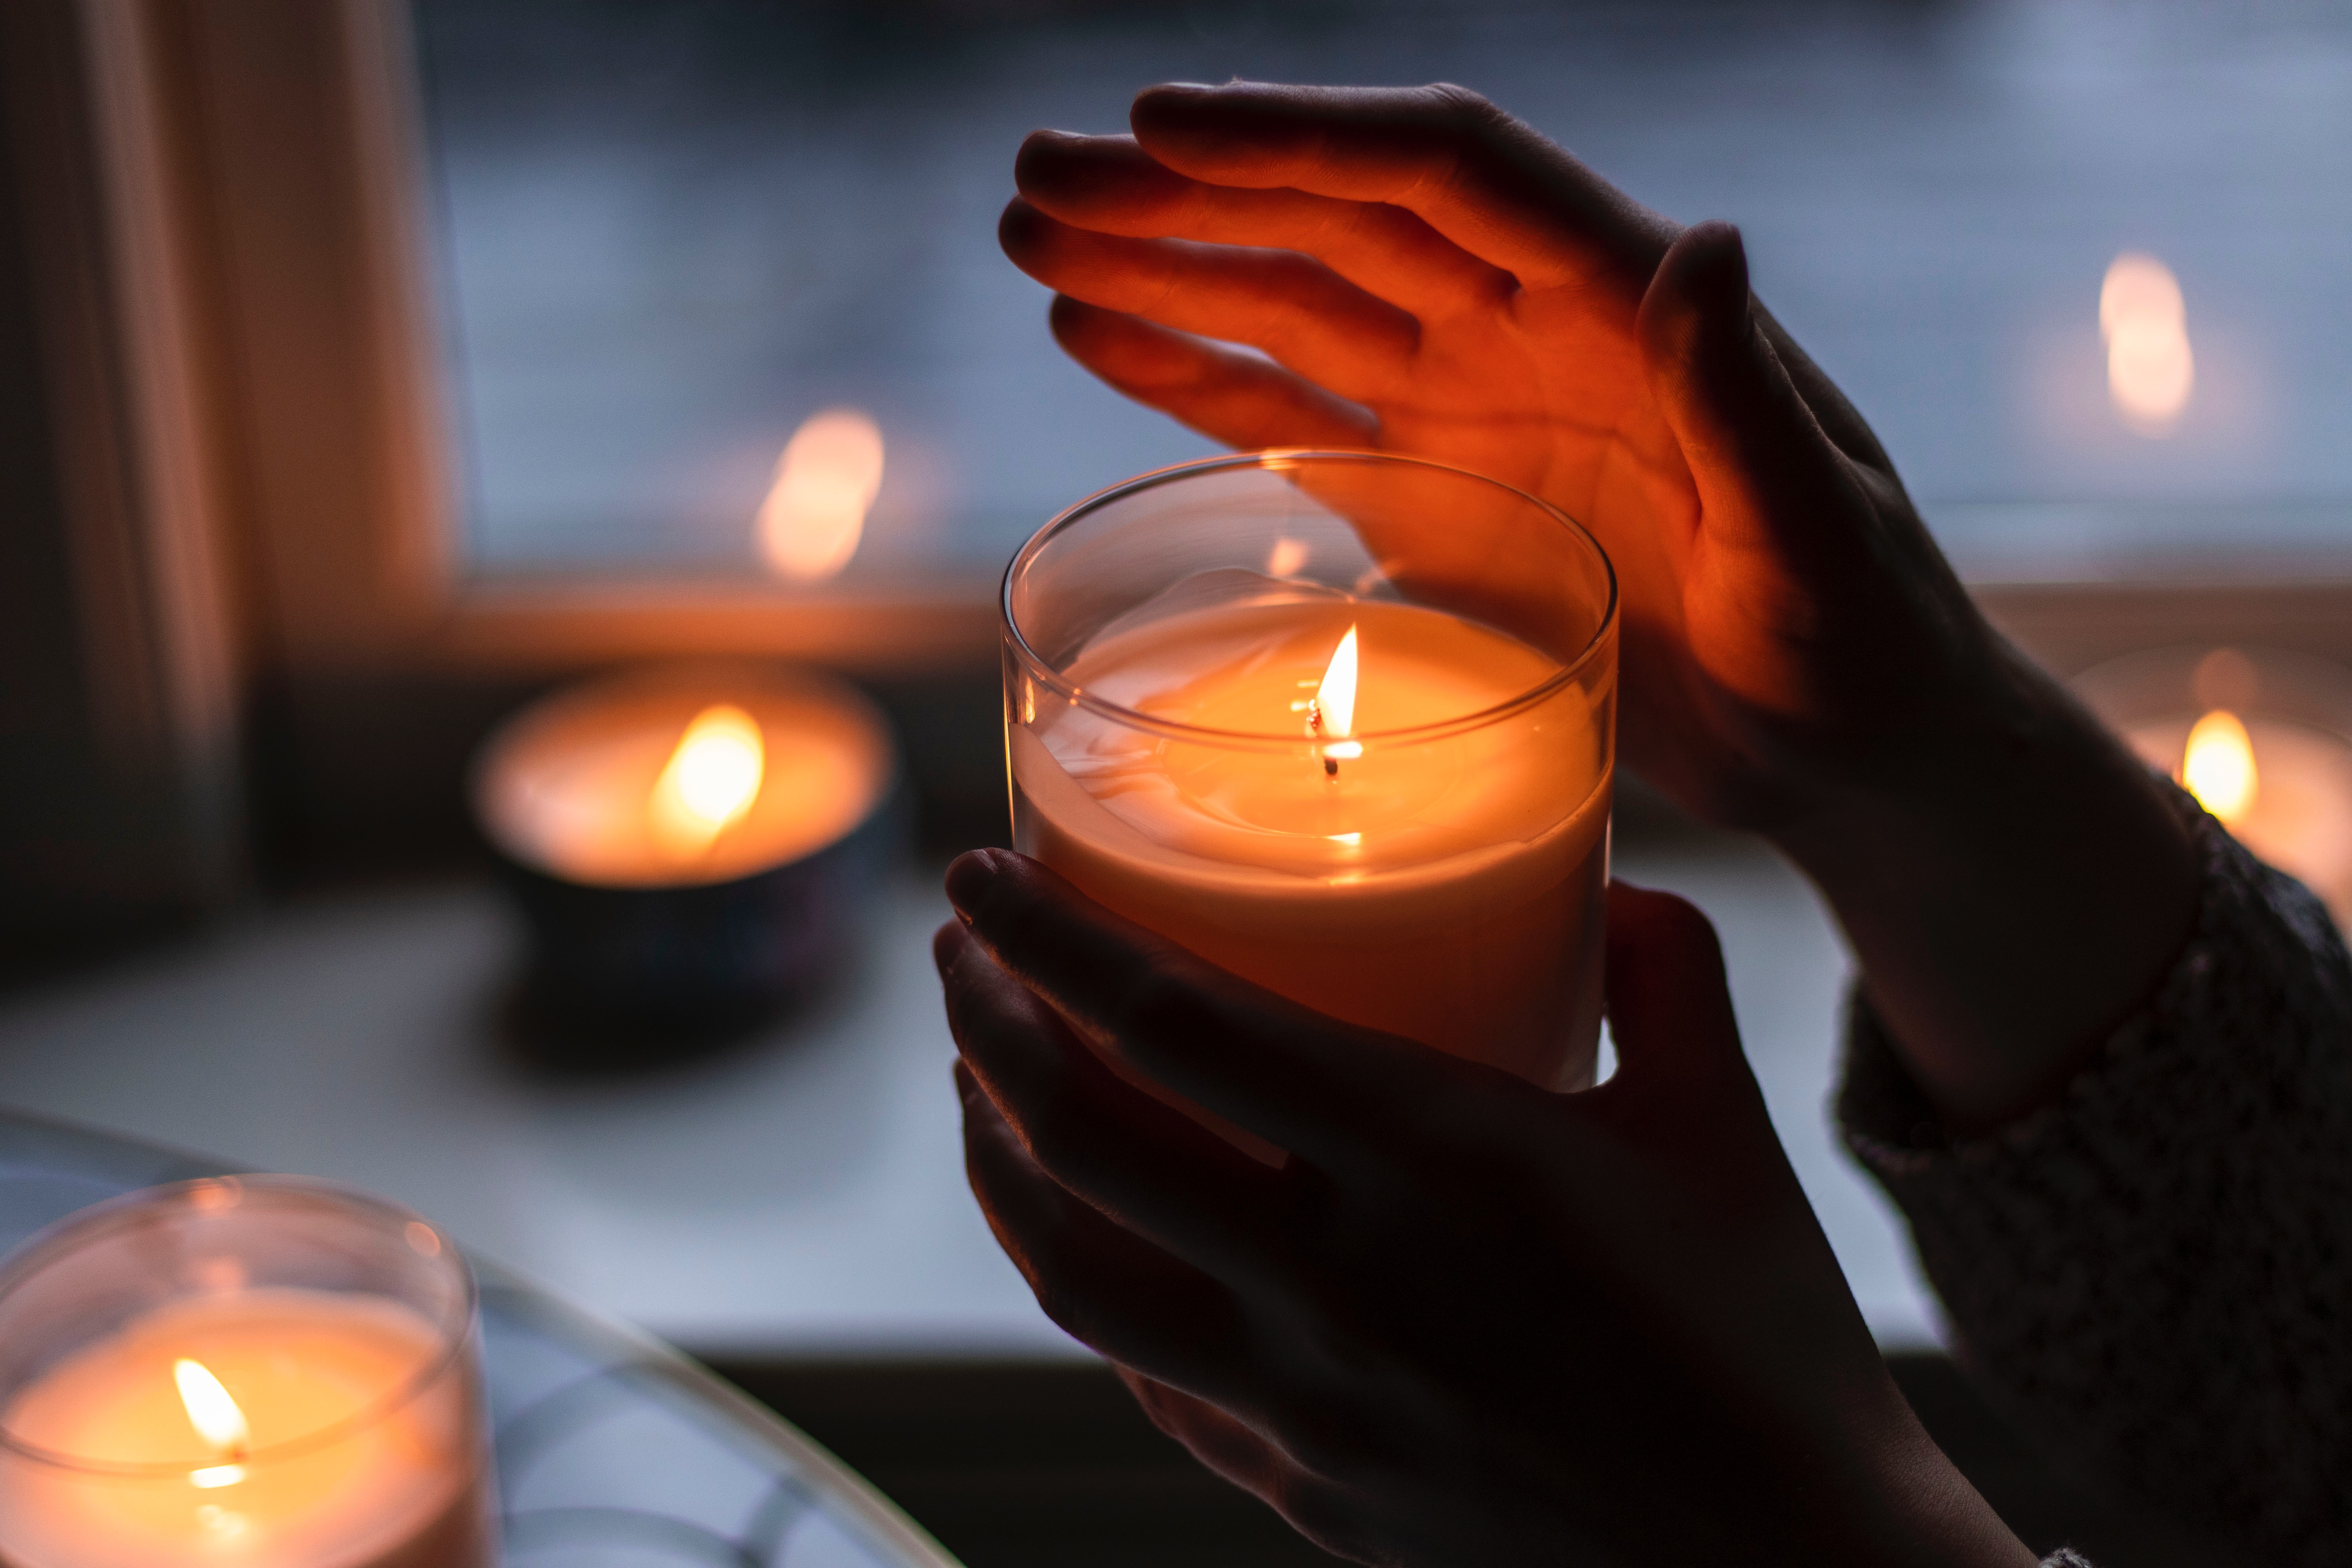 Hands holding a lit candle